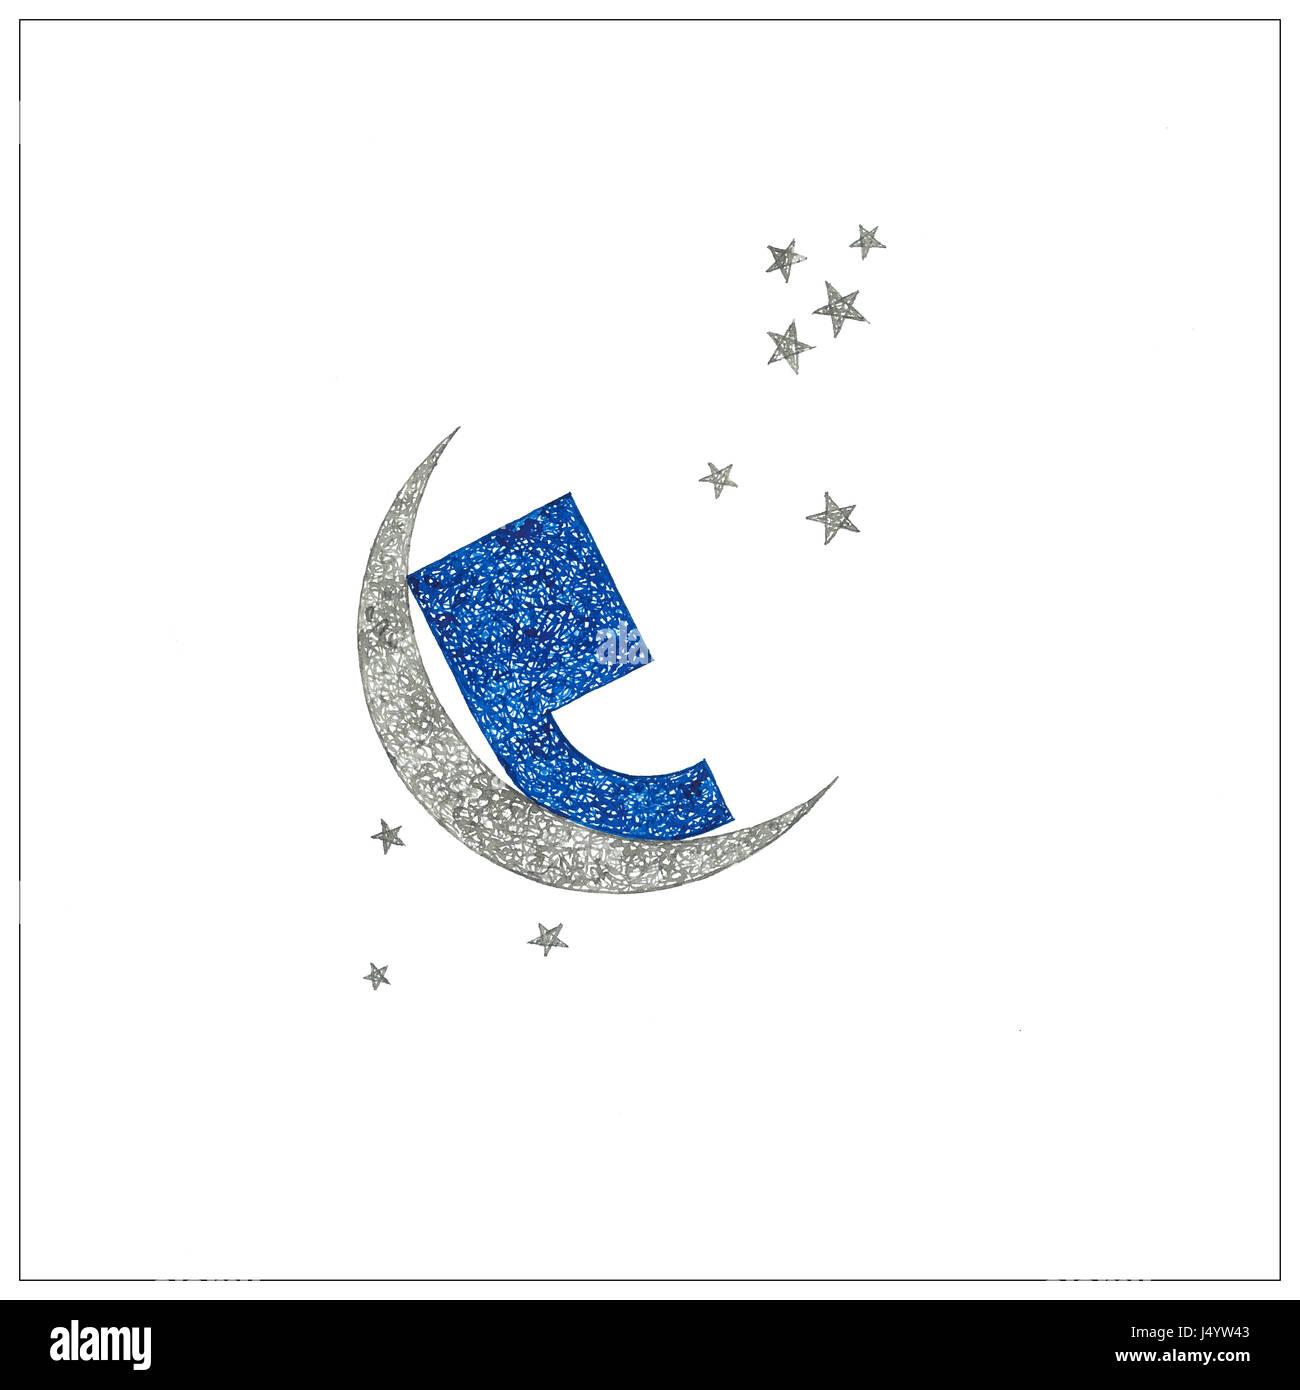 cool star and moon drawings